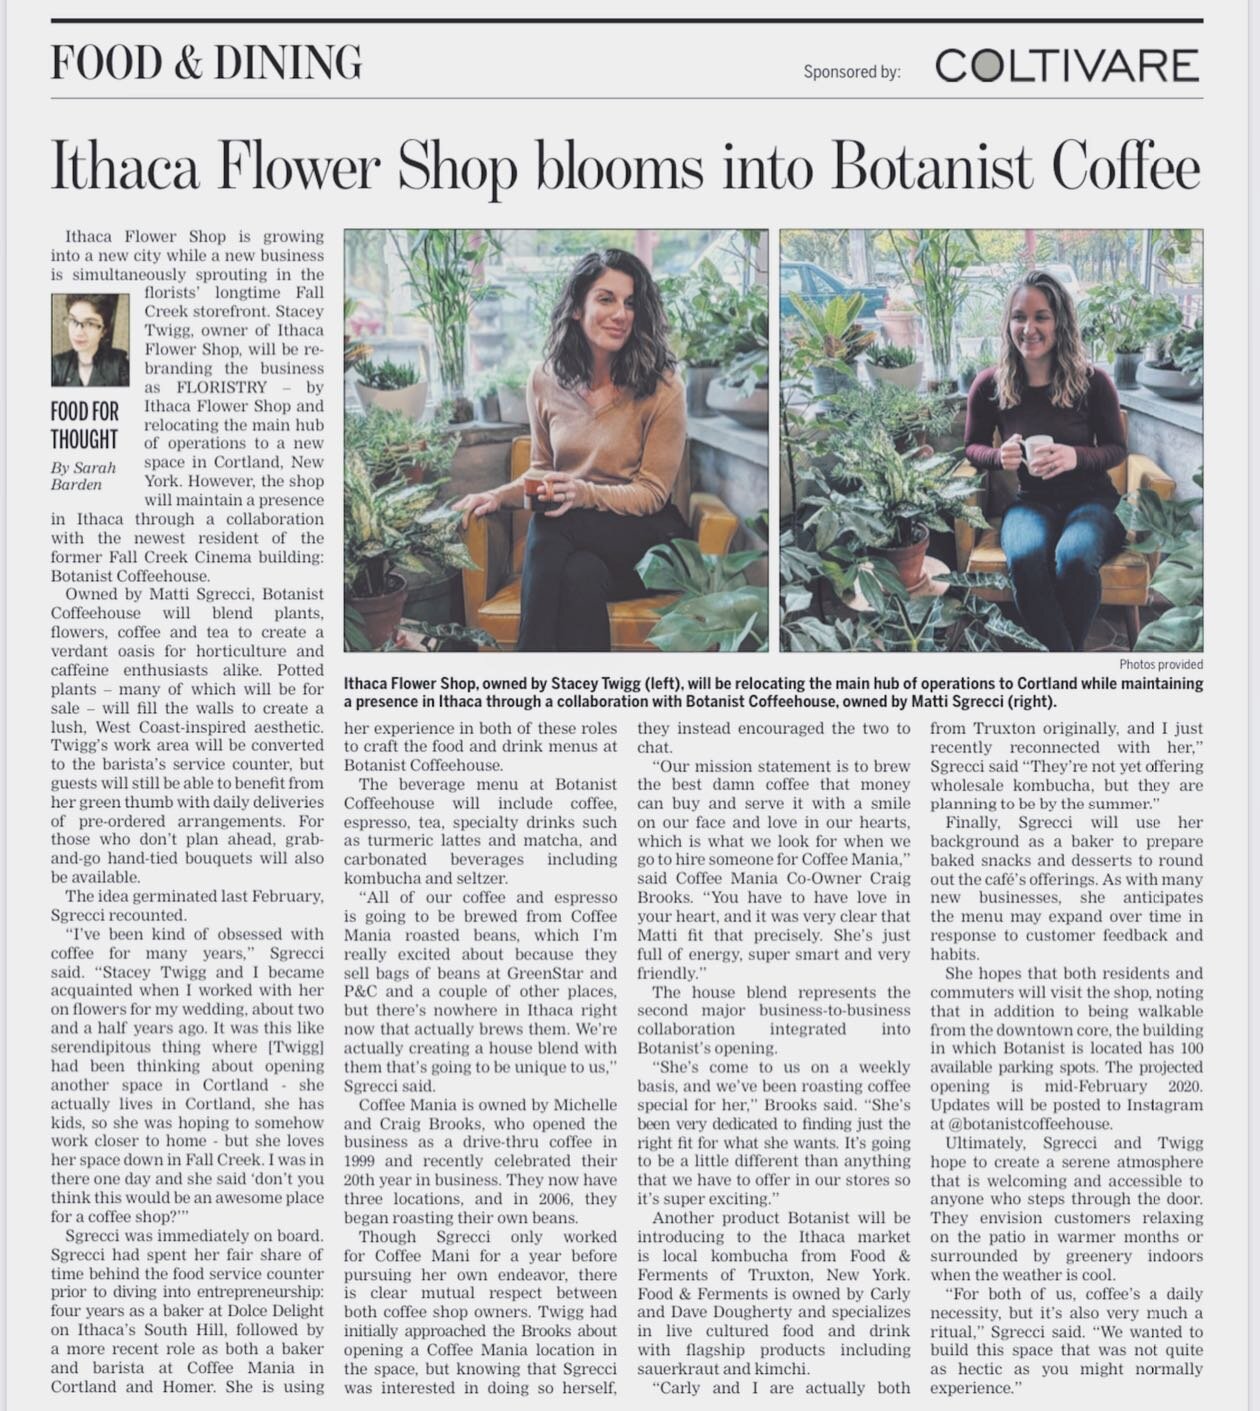 a bit of Botanist buzz hit the presses today as @tompkinsweekly, page 6 📰🐝☕️🌿
.
thank you to Sarah [ @ithacaisfoodies ] for the highlight and super rundown of our caffeinated, planty vision!

endlessly stoked to be in the company of @ithacaflowers